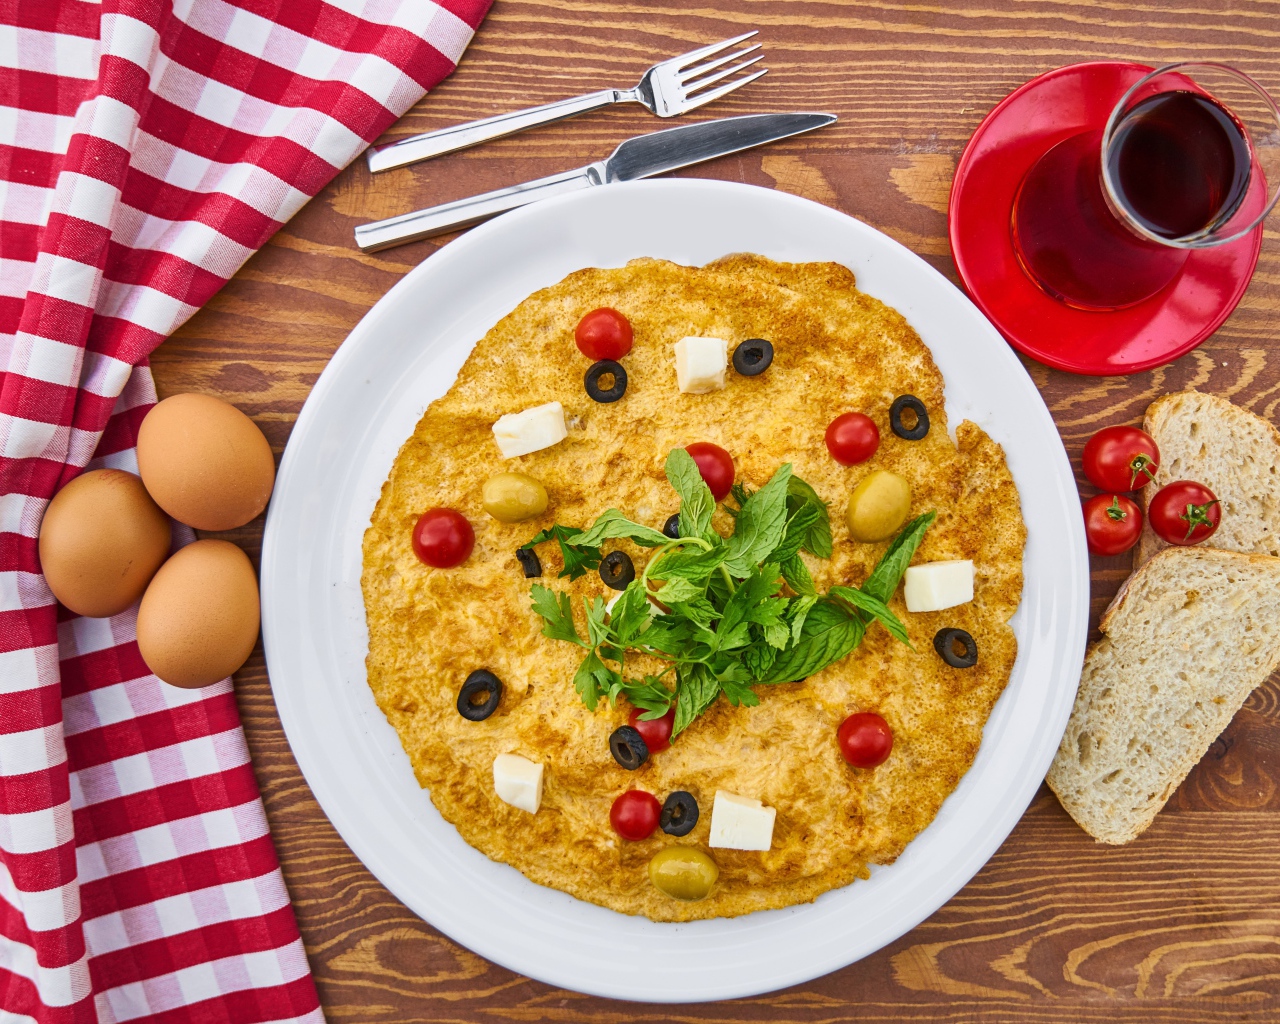 Omelet on the table with tea, tomatoes, eggs and bread